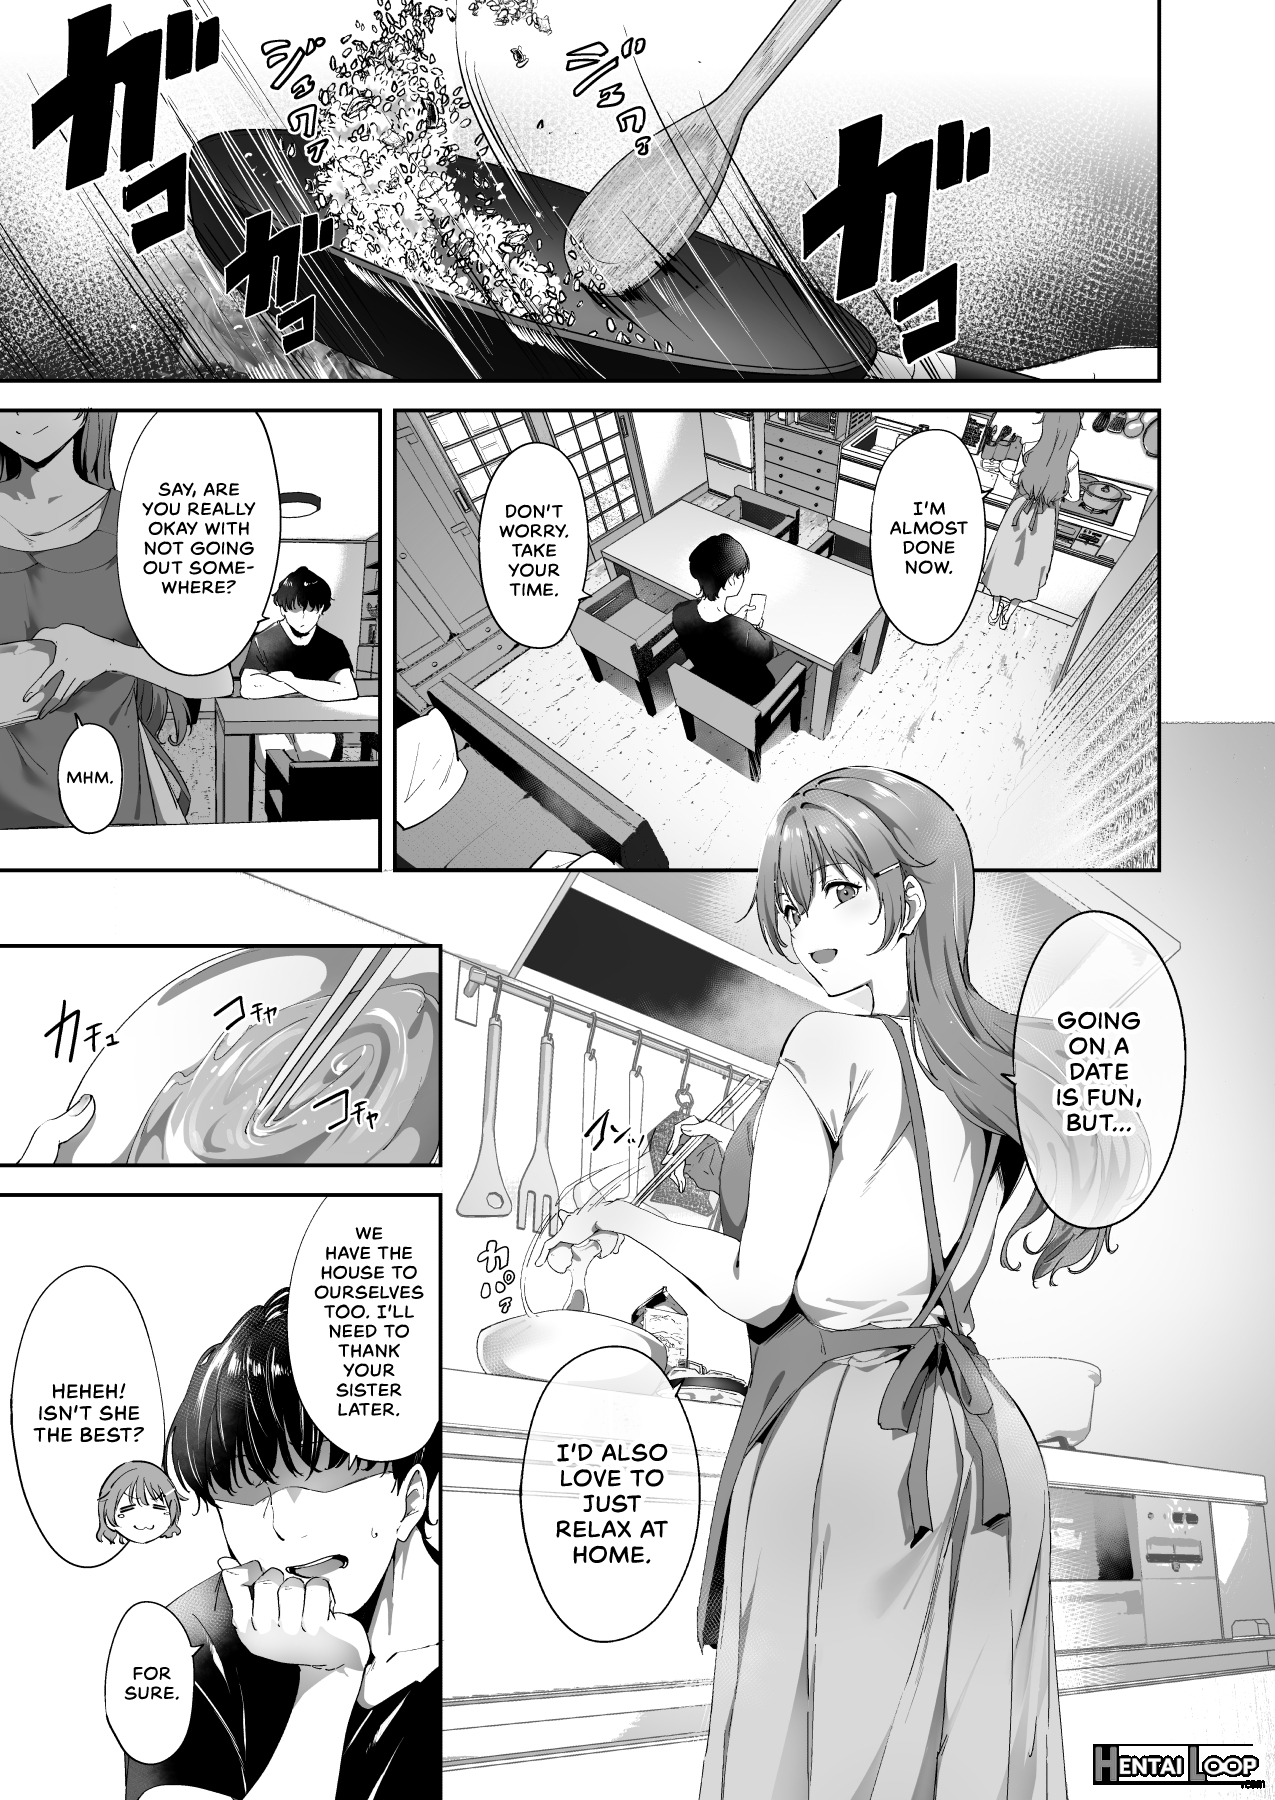 Konoe's Day Off page 2